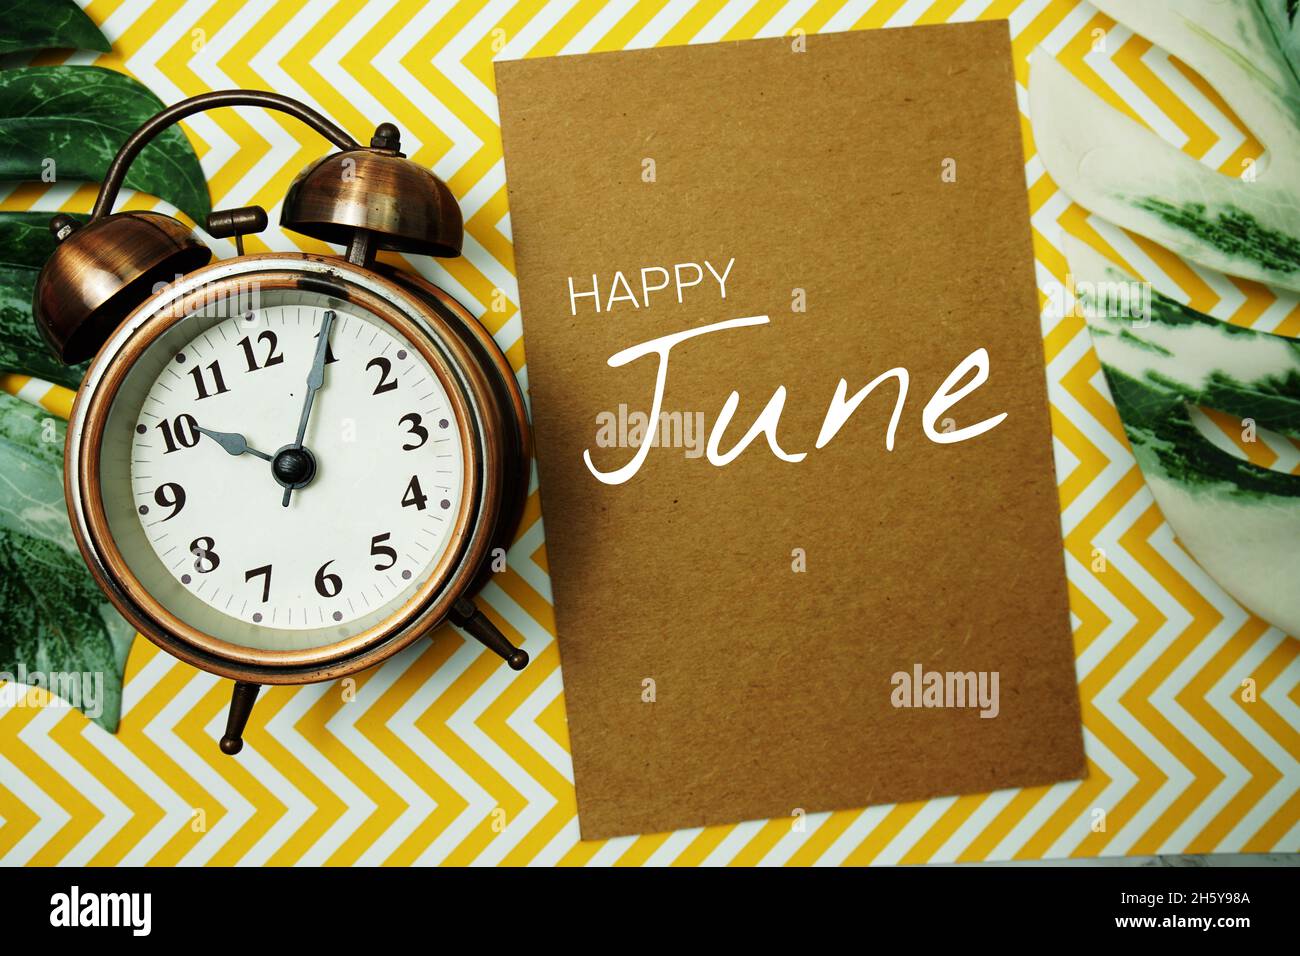 Happy June typography text on paper card with alarm clock and Monstera  leave Stock Photo - Alamy